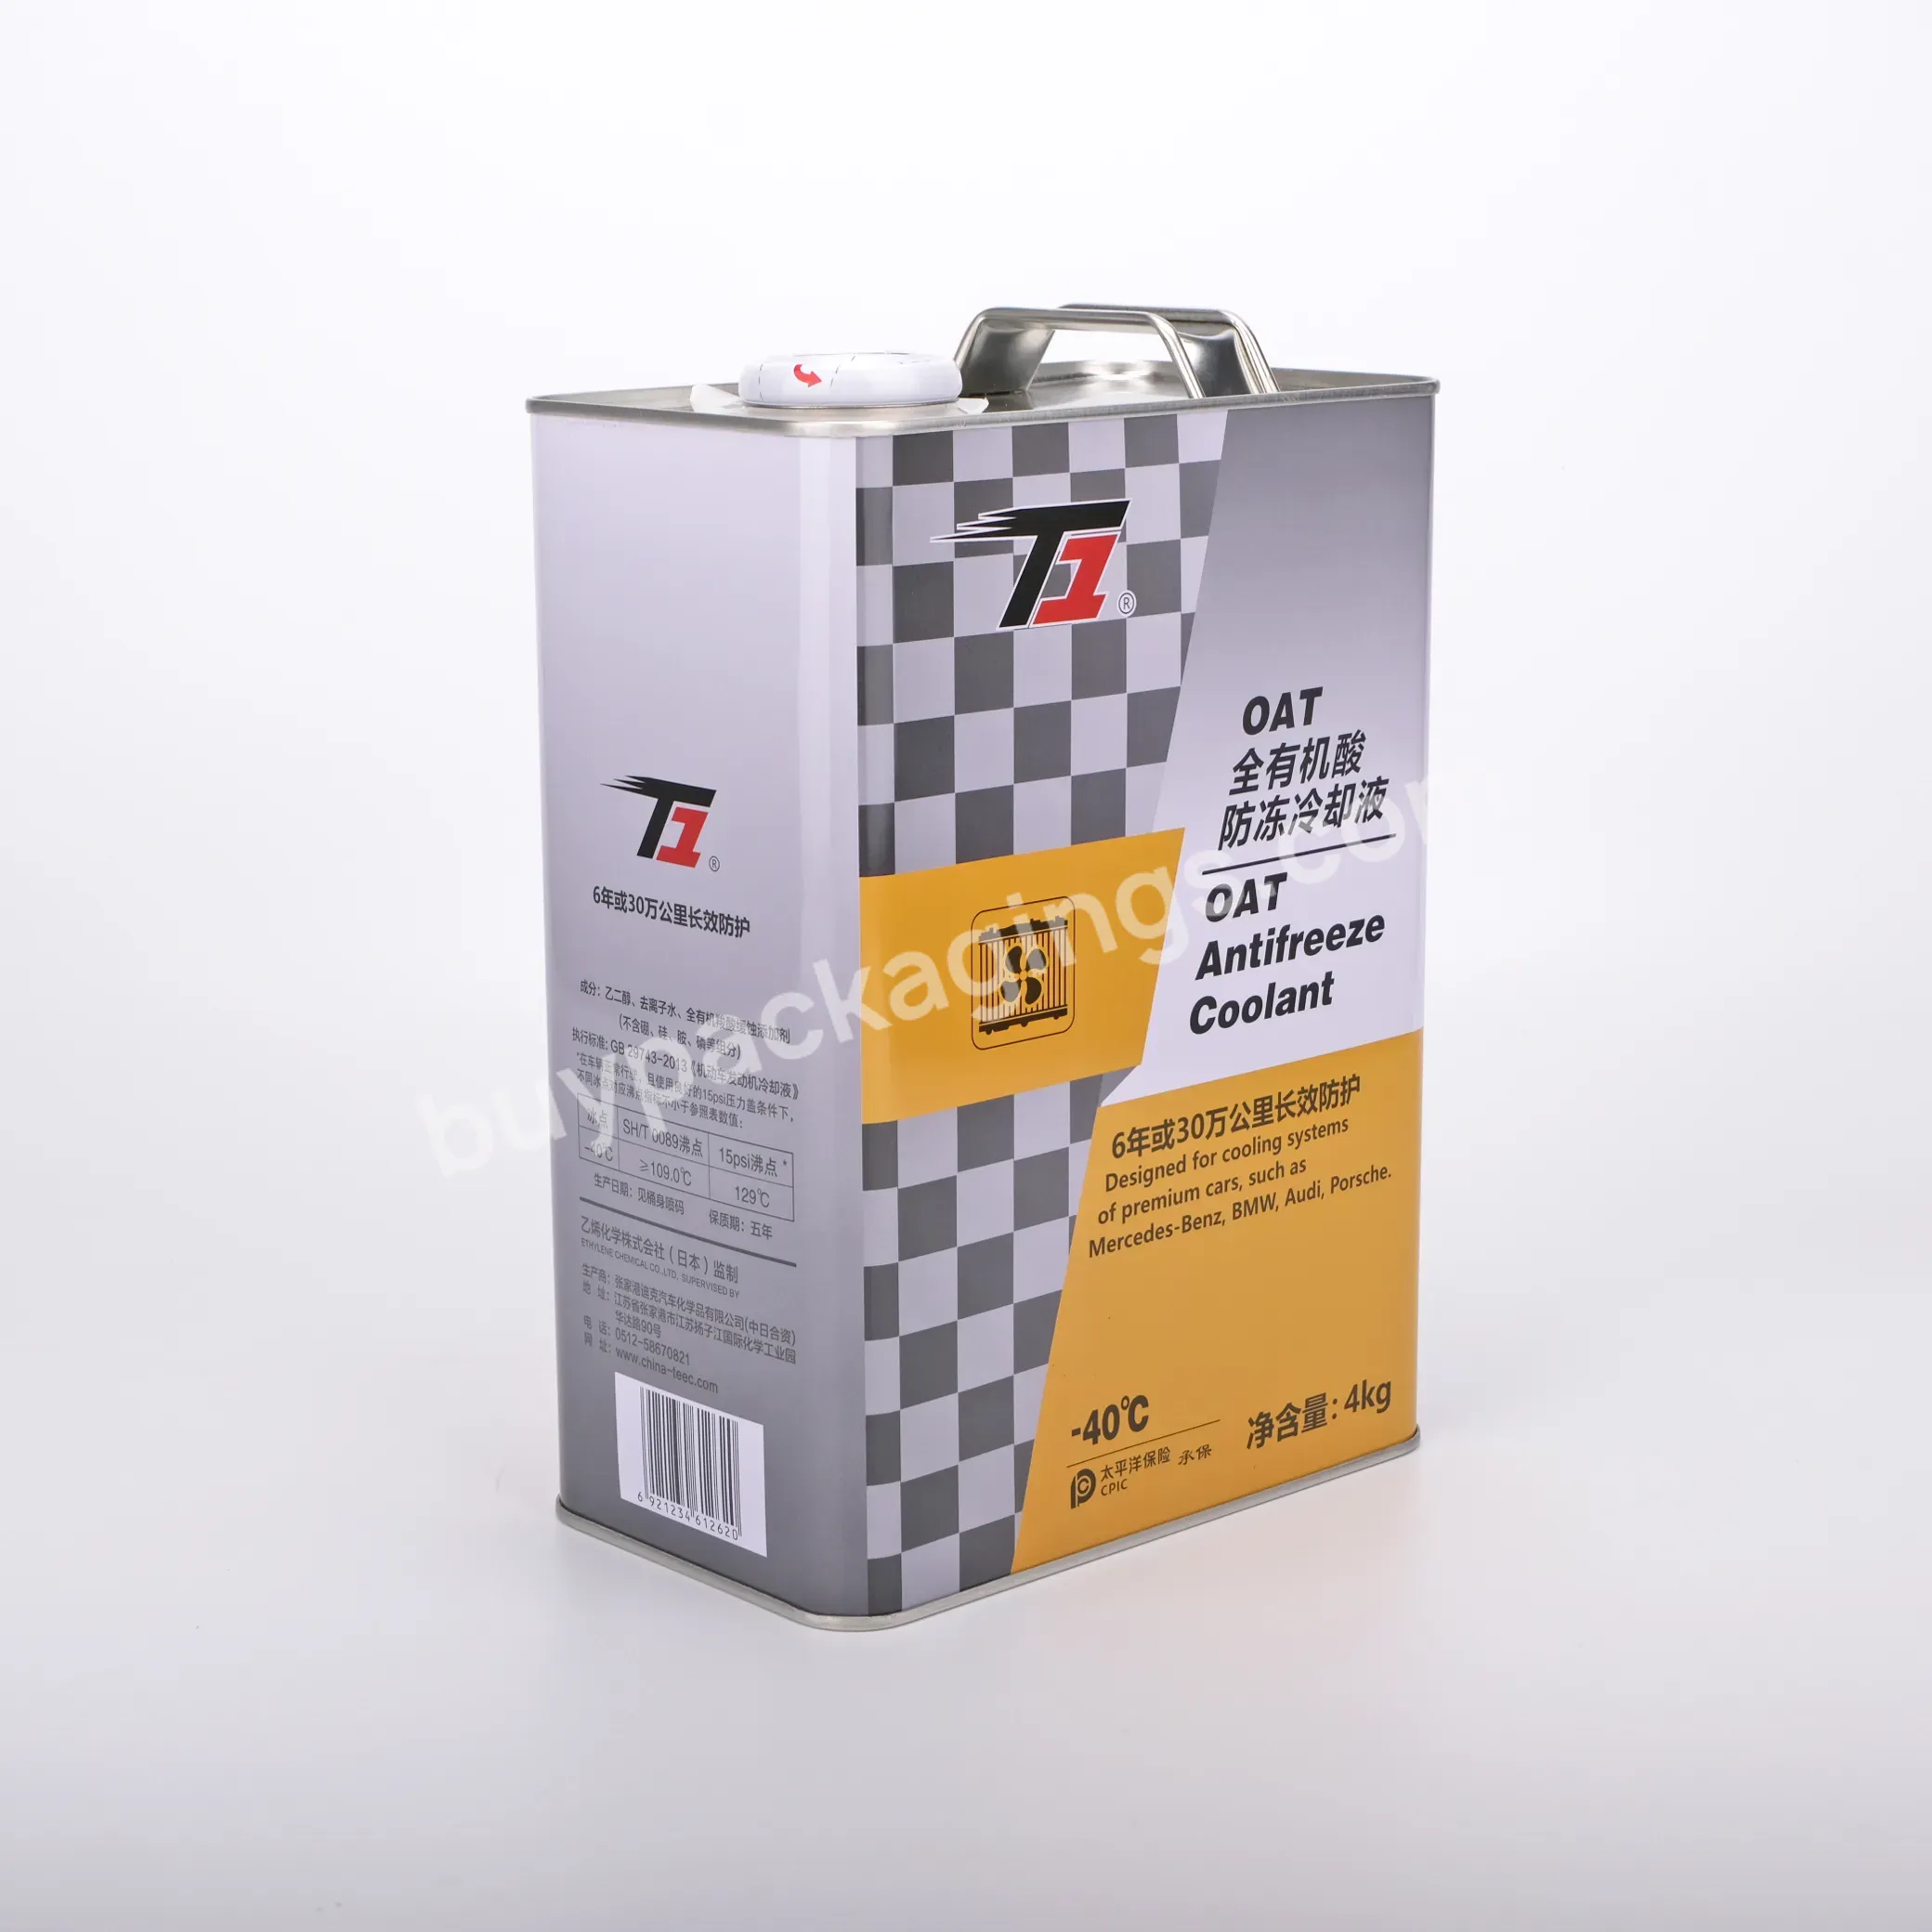 Rectangular F-style 1l 4l 5l Square Metal Tin Oil Cans With Japanese Cover Used For Petrol Oil Chemicals China Manufacturer - Buy Rectangular F-style With Japanese Cover,1 Gallon Metal Packing Bucket Square Oil Tin Can,1l 4l 5l Square Metal Tin Oil Cans.